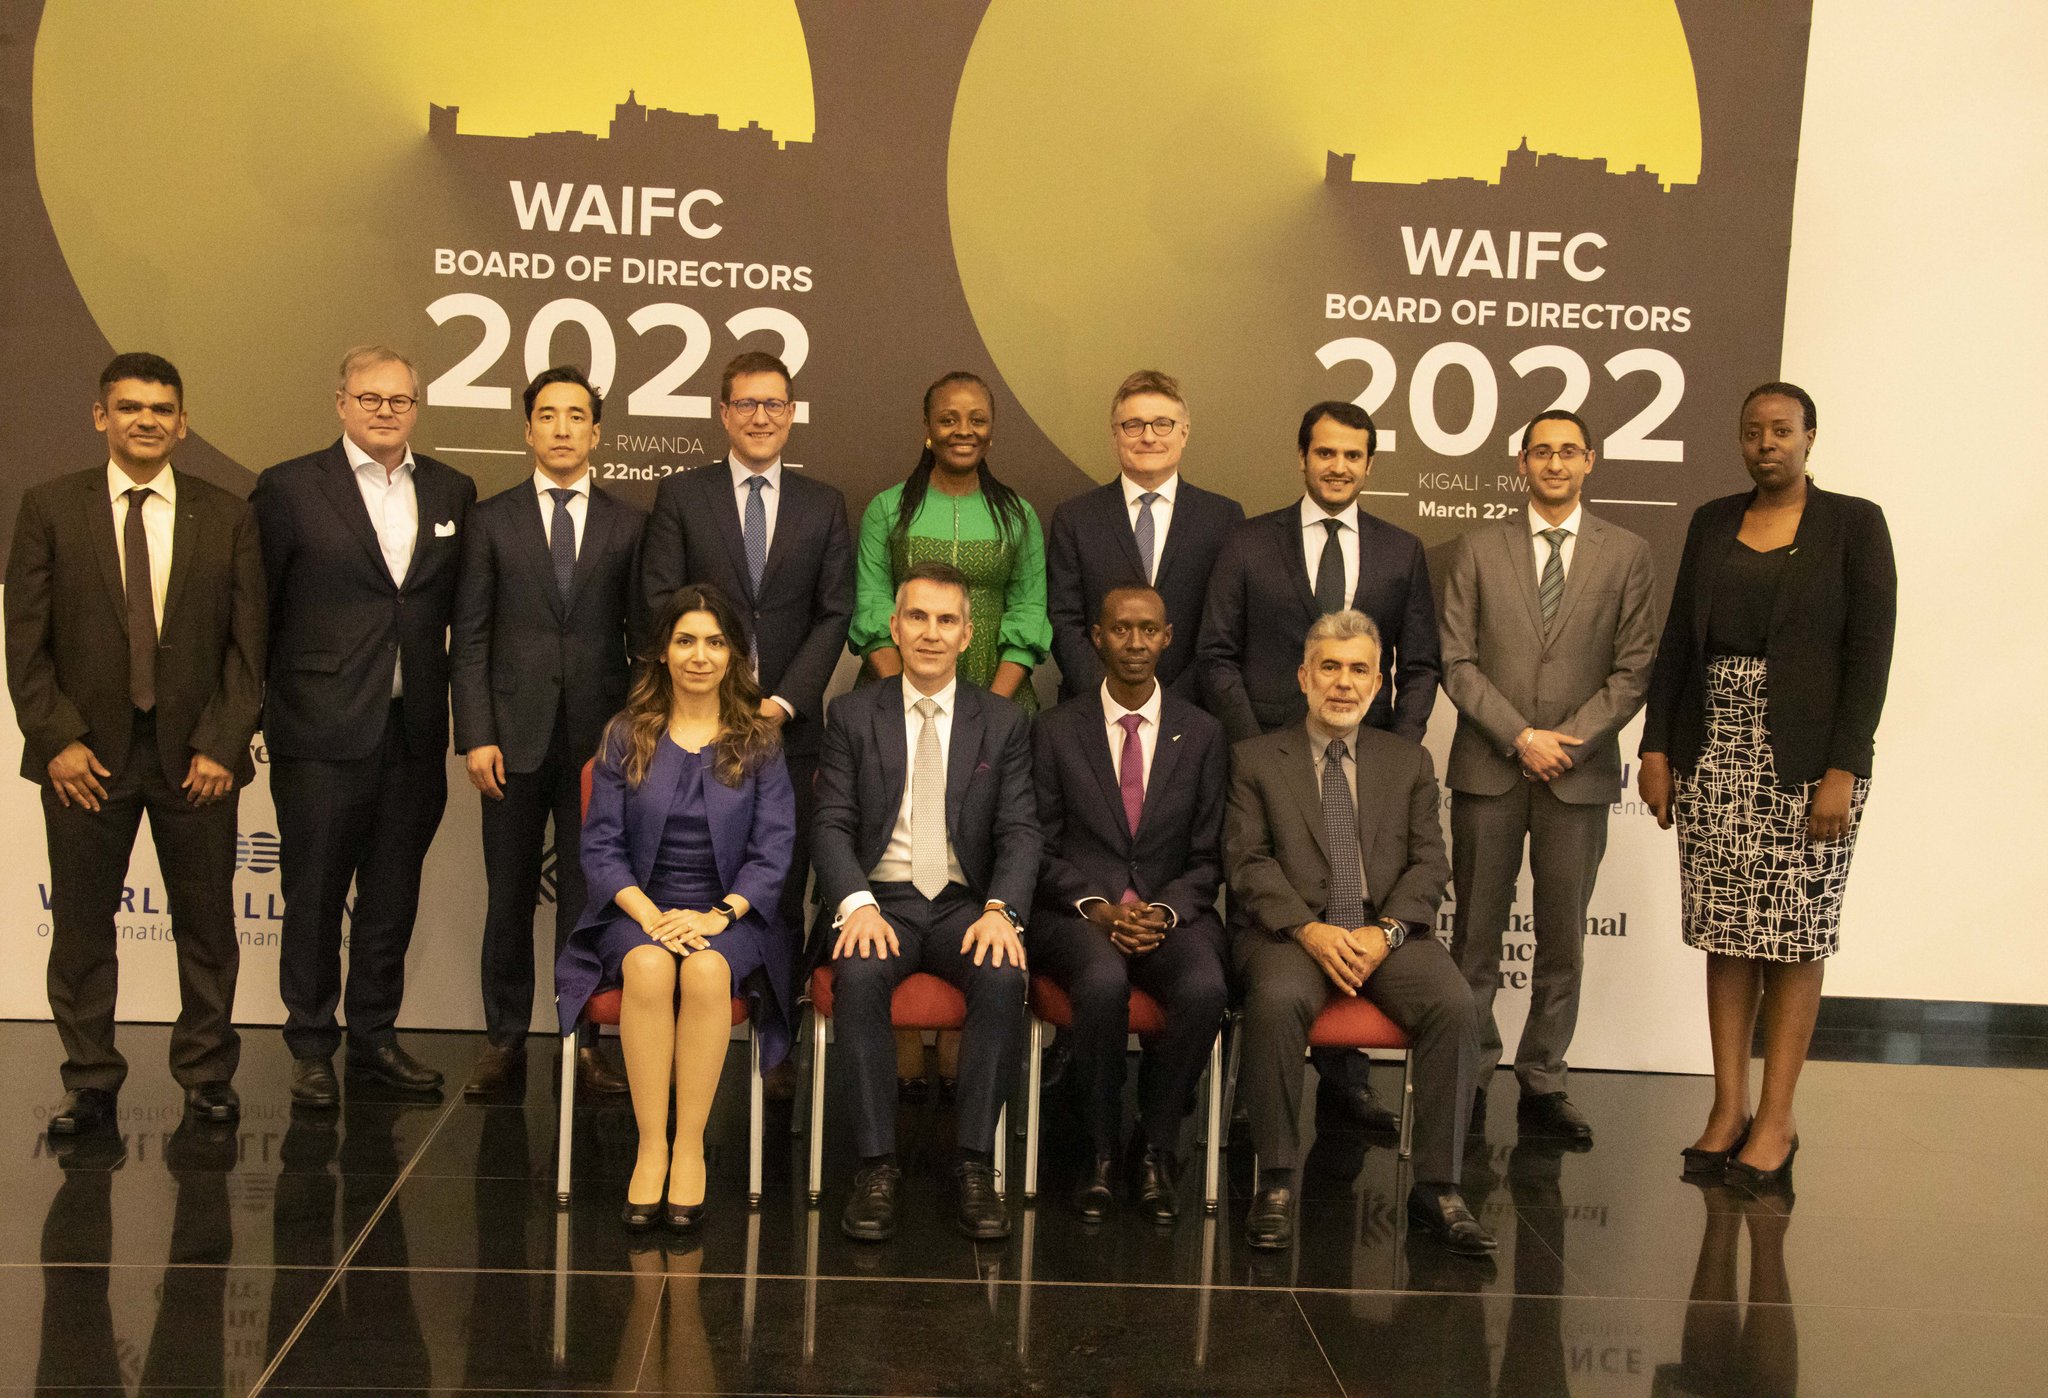 WAIFC Board members pose for a group photo. Rwanda joined WAIFC in October 2020. Courtesy.